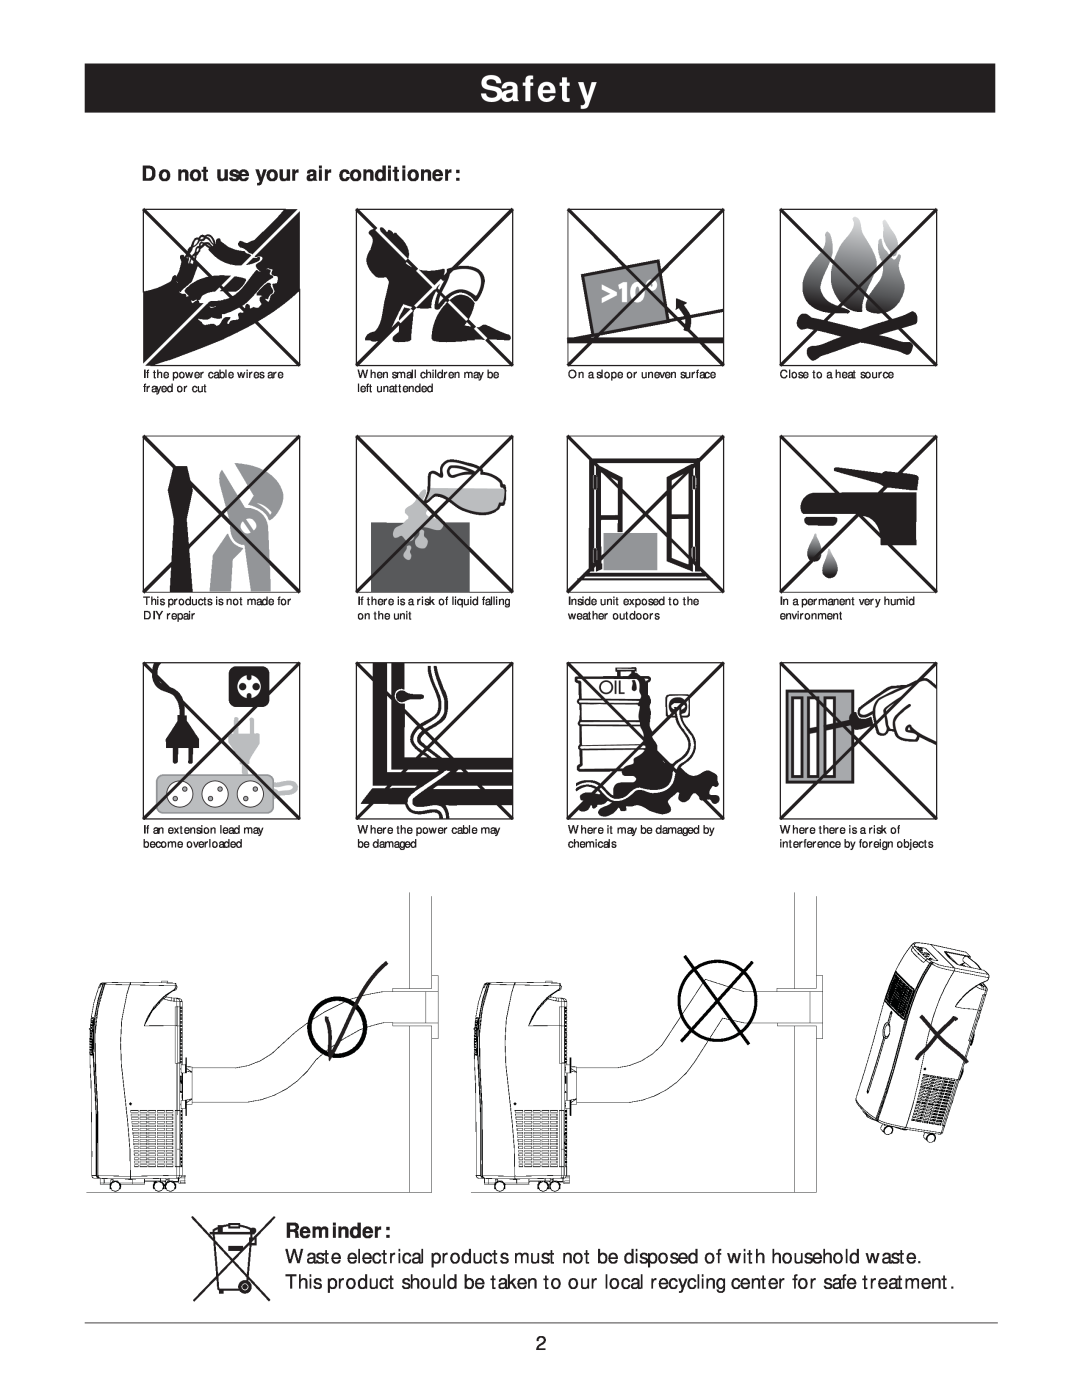 Amcor PORTABLE AIRCONDITIONER owner manual Safety, Do not use your air conditioner, Reminder 